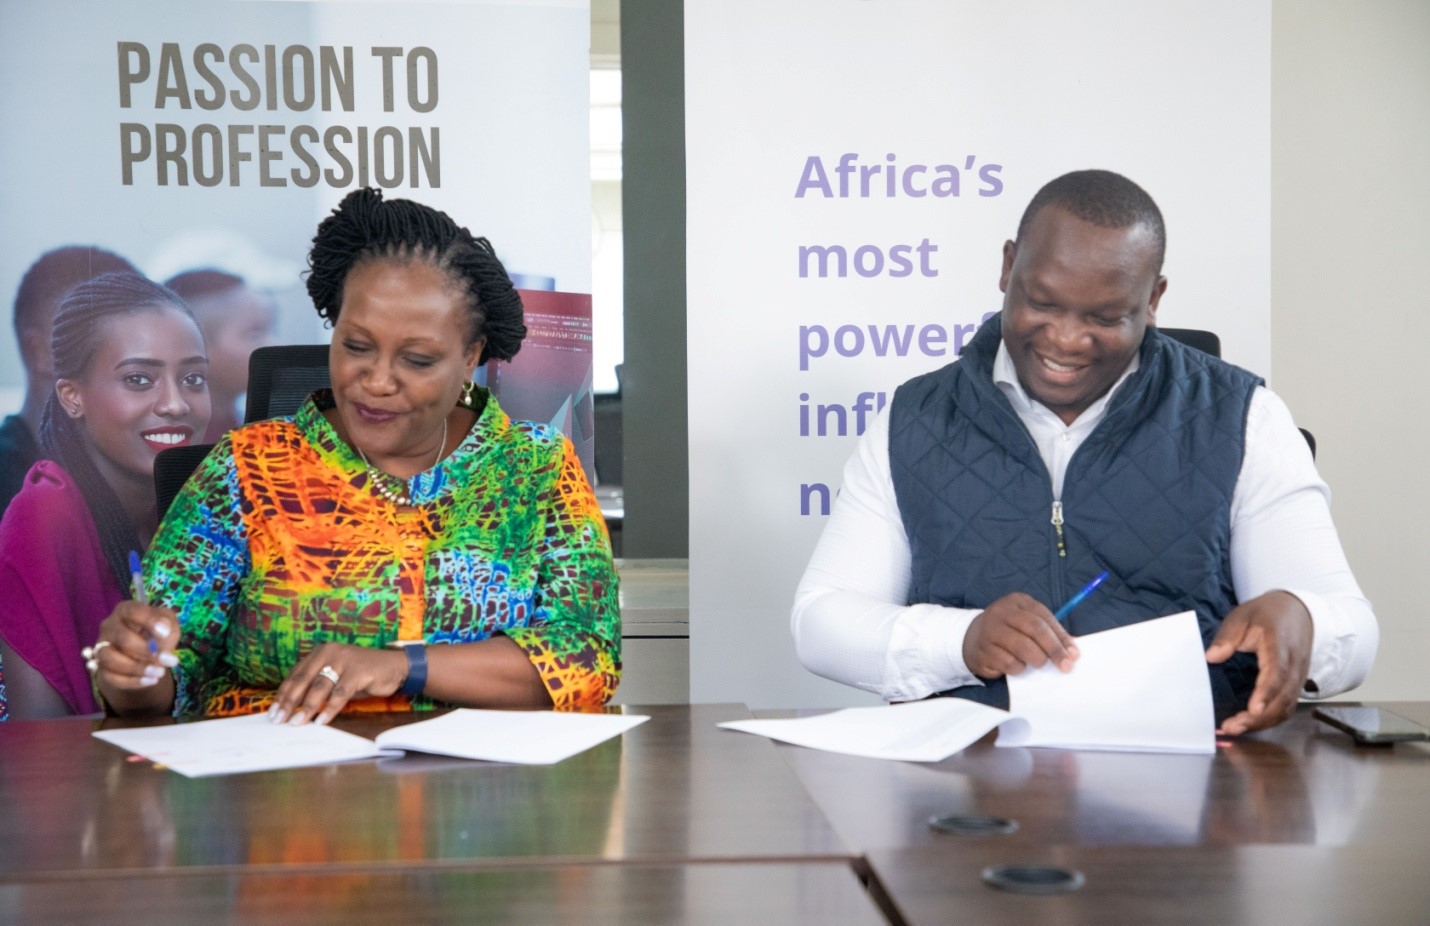 ADMI co-founder and CEO Dr. Laila Macharia and Wowzi co-founder and President Mike Otieno. The two organizations have signed a Memorandum of Understanding to empower at least one million content creators, providing them with a platform to transform their creative expression into dignified livelihoods across Africa.